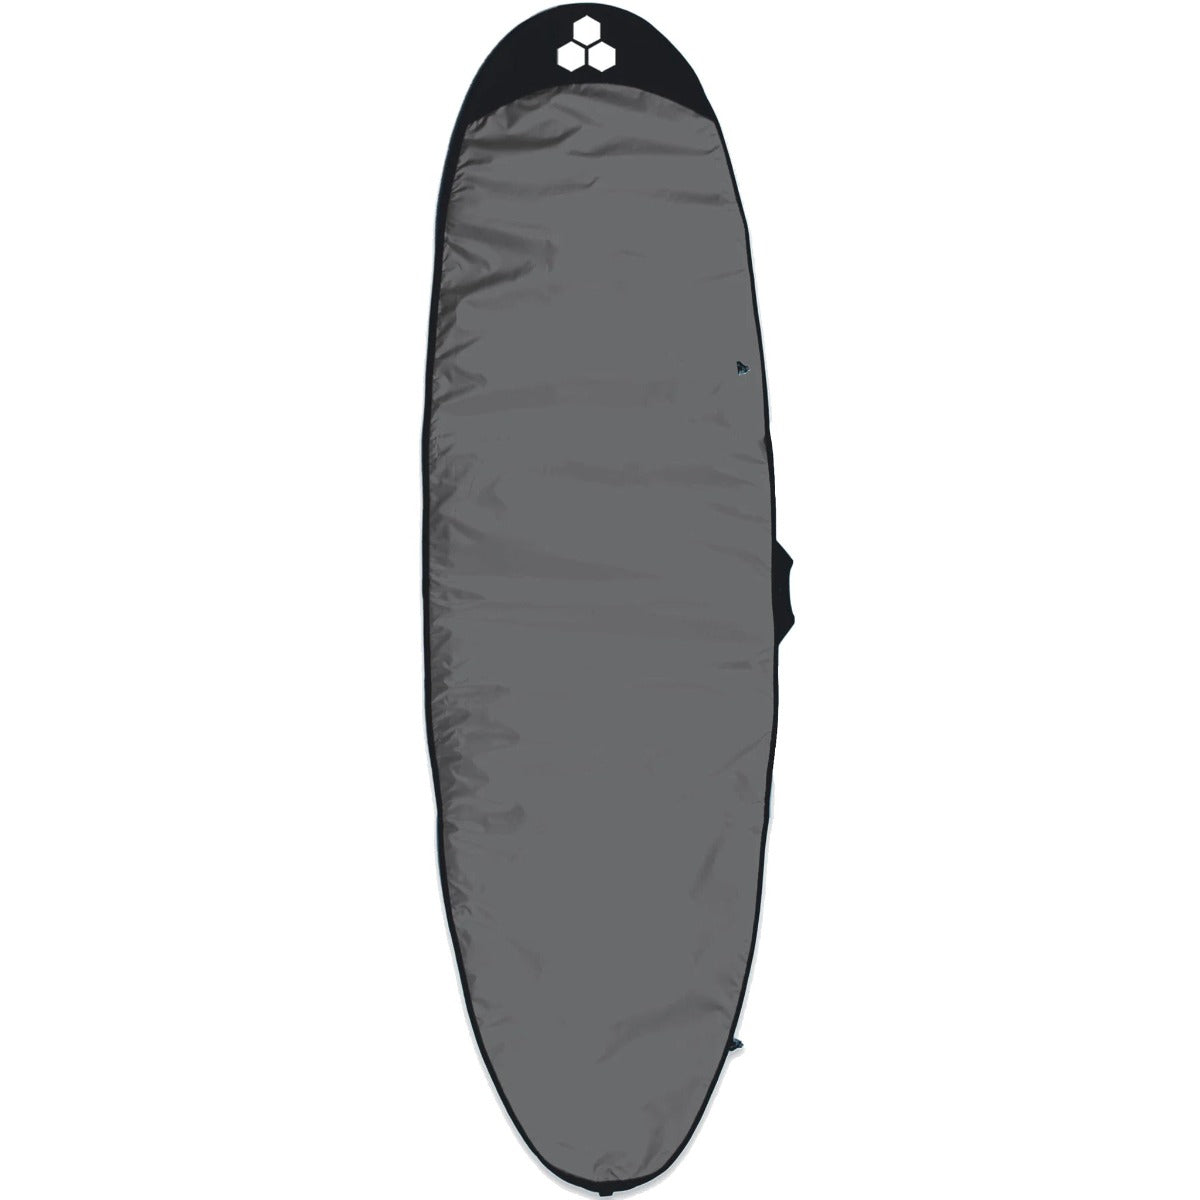 channel-islands-surfboard-bag-cover-featherlite-longboard-hex-grey-white-black-sheep-surf-co-galway-ireland